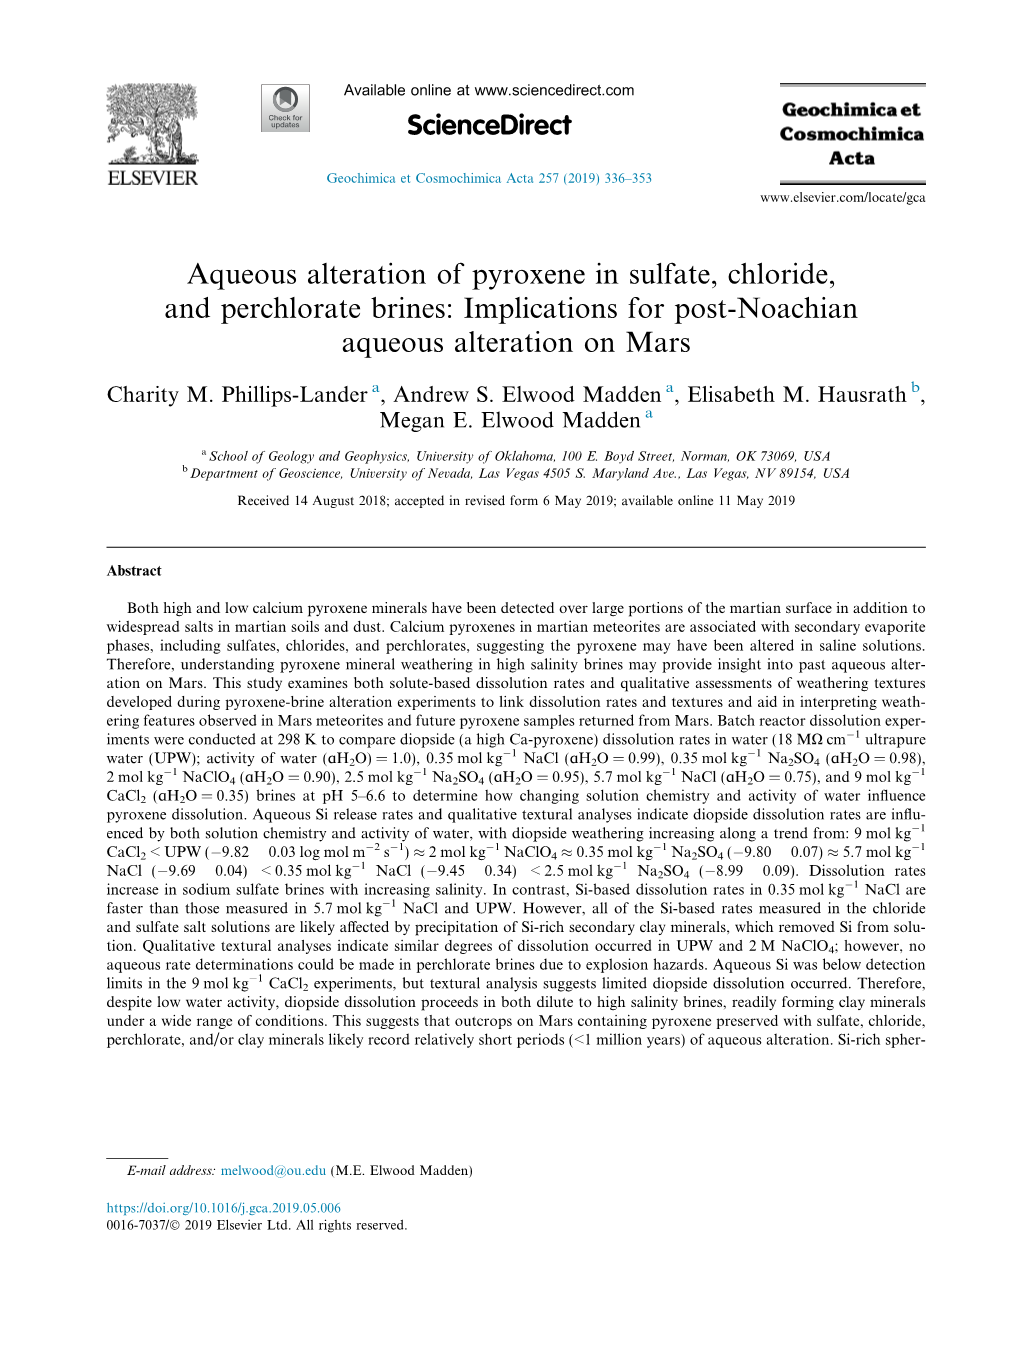 Aqueous Alteration of Pyroxene in Sulfate, Chloride, and Perchlorate Brines: Implications for Post-Noachian Aqueous Alteration on Mars